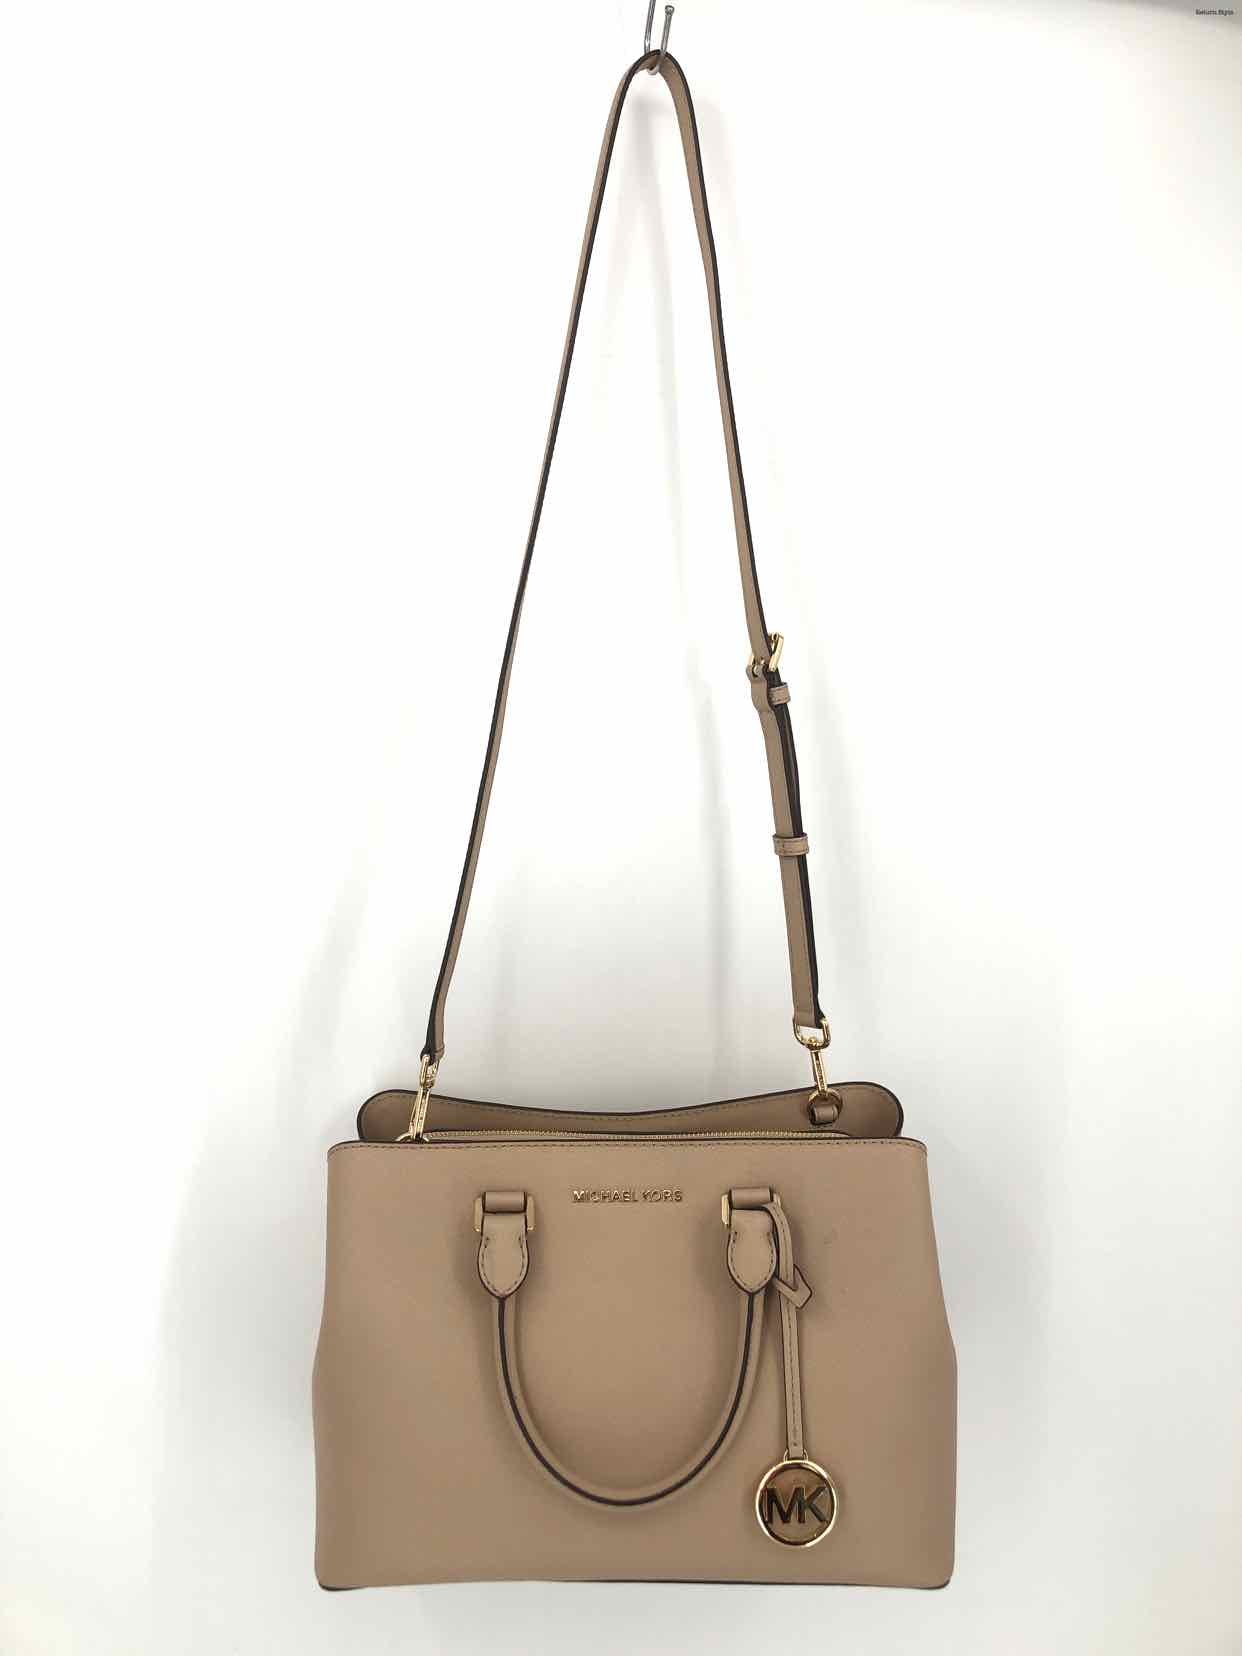 MICHAEL KORS HANDBAG Purse Beige Tan And White, With Handles And Strap  Pre-Owned $24.99 - PicClick